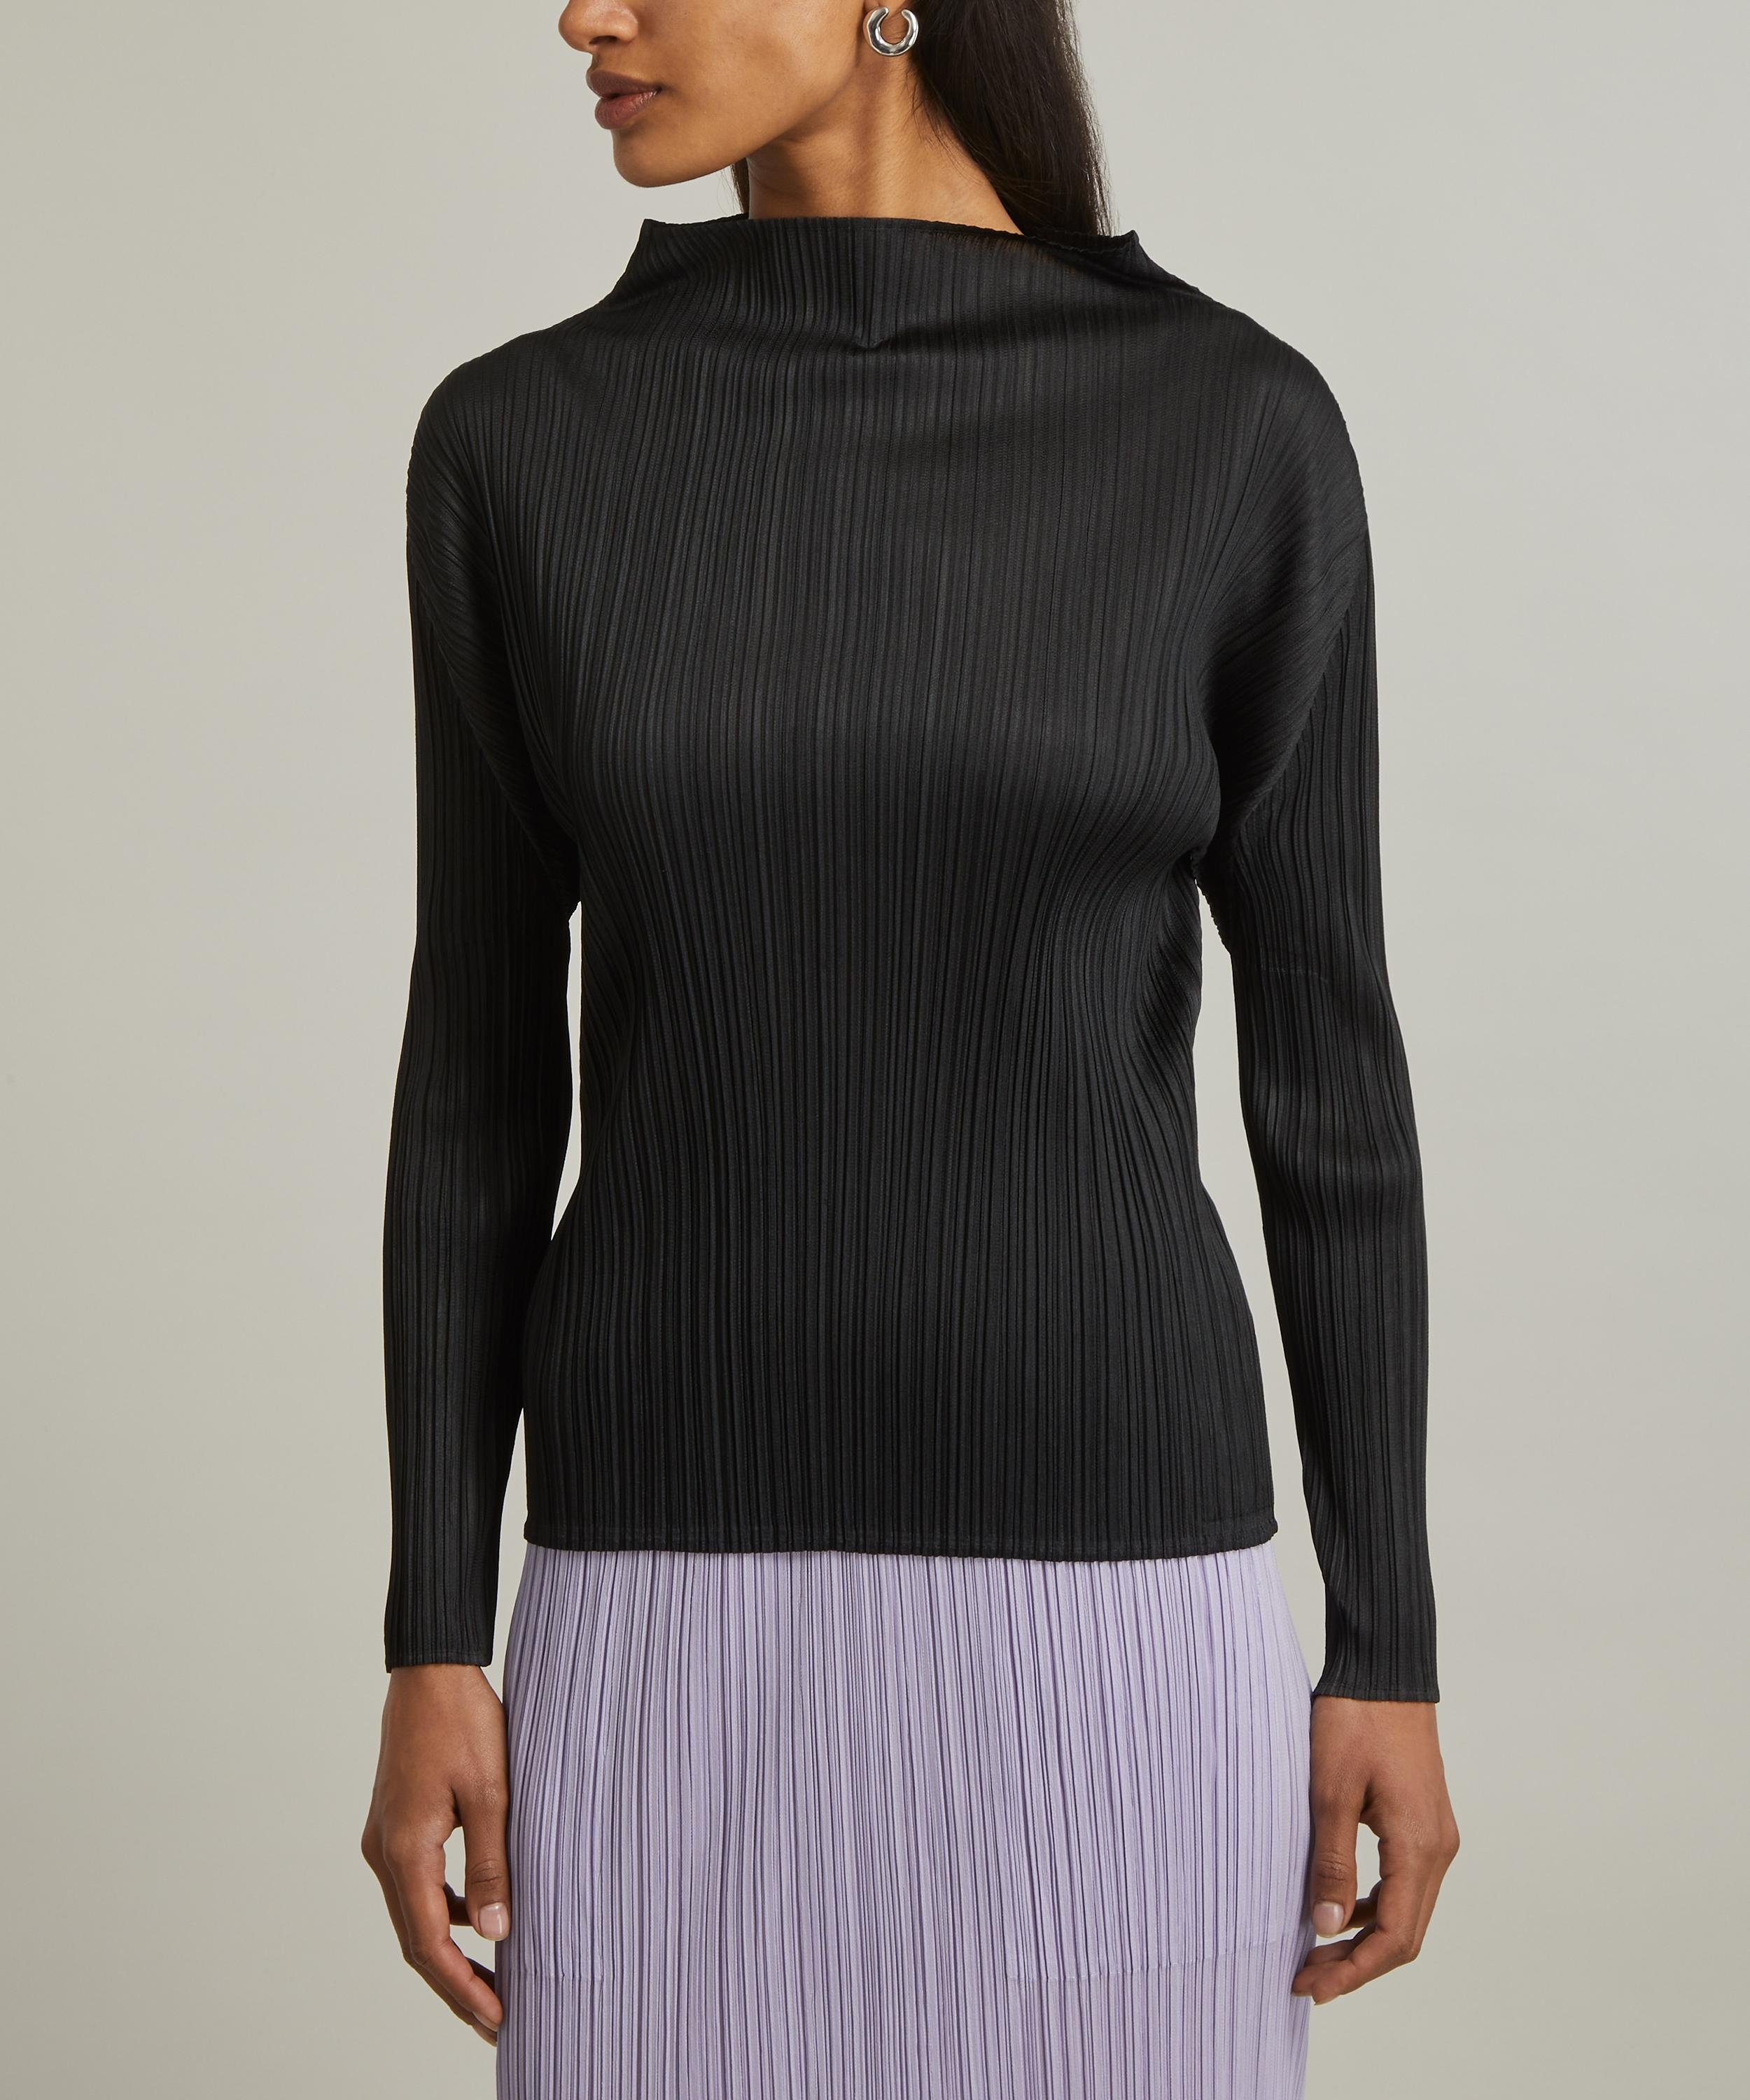 MONTHLY COLOURS NOVEMBER Pleated Black Top - 3